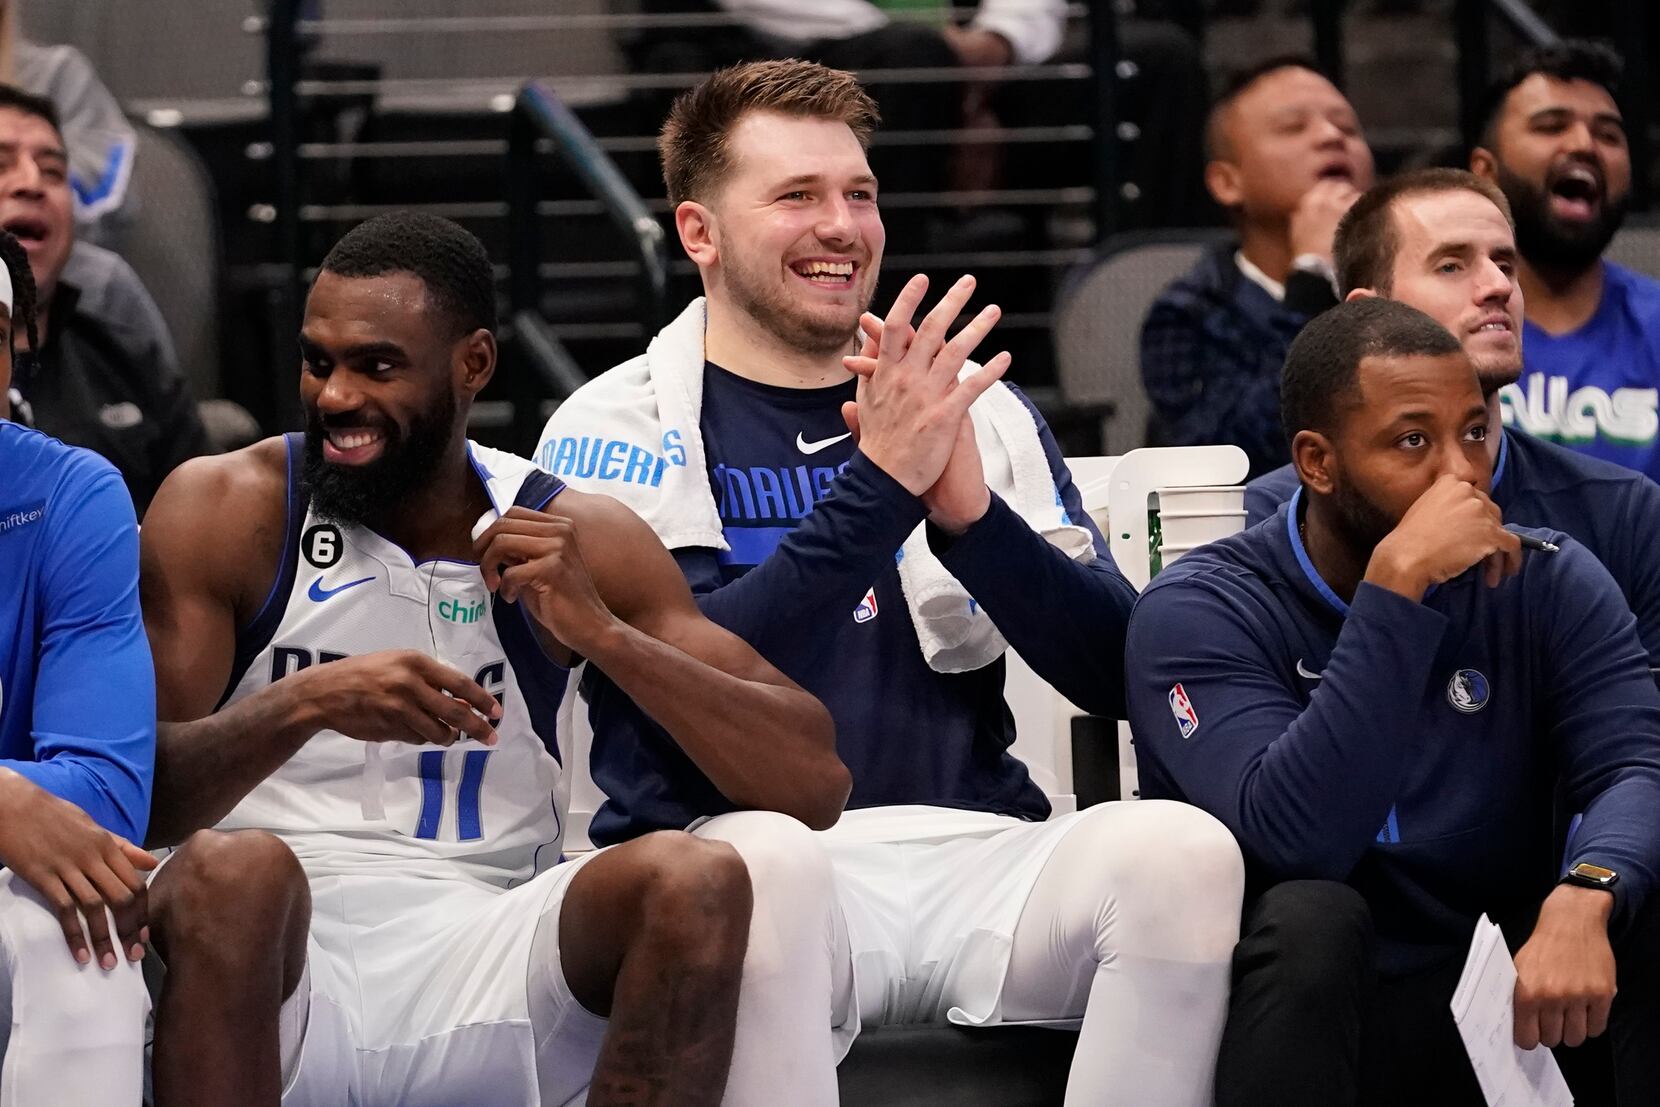 3 early New York Knicks predictions for 2023 trade deadline